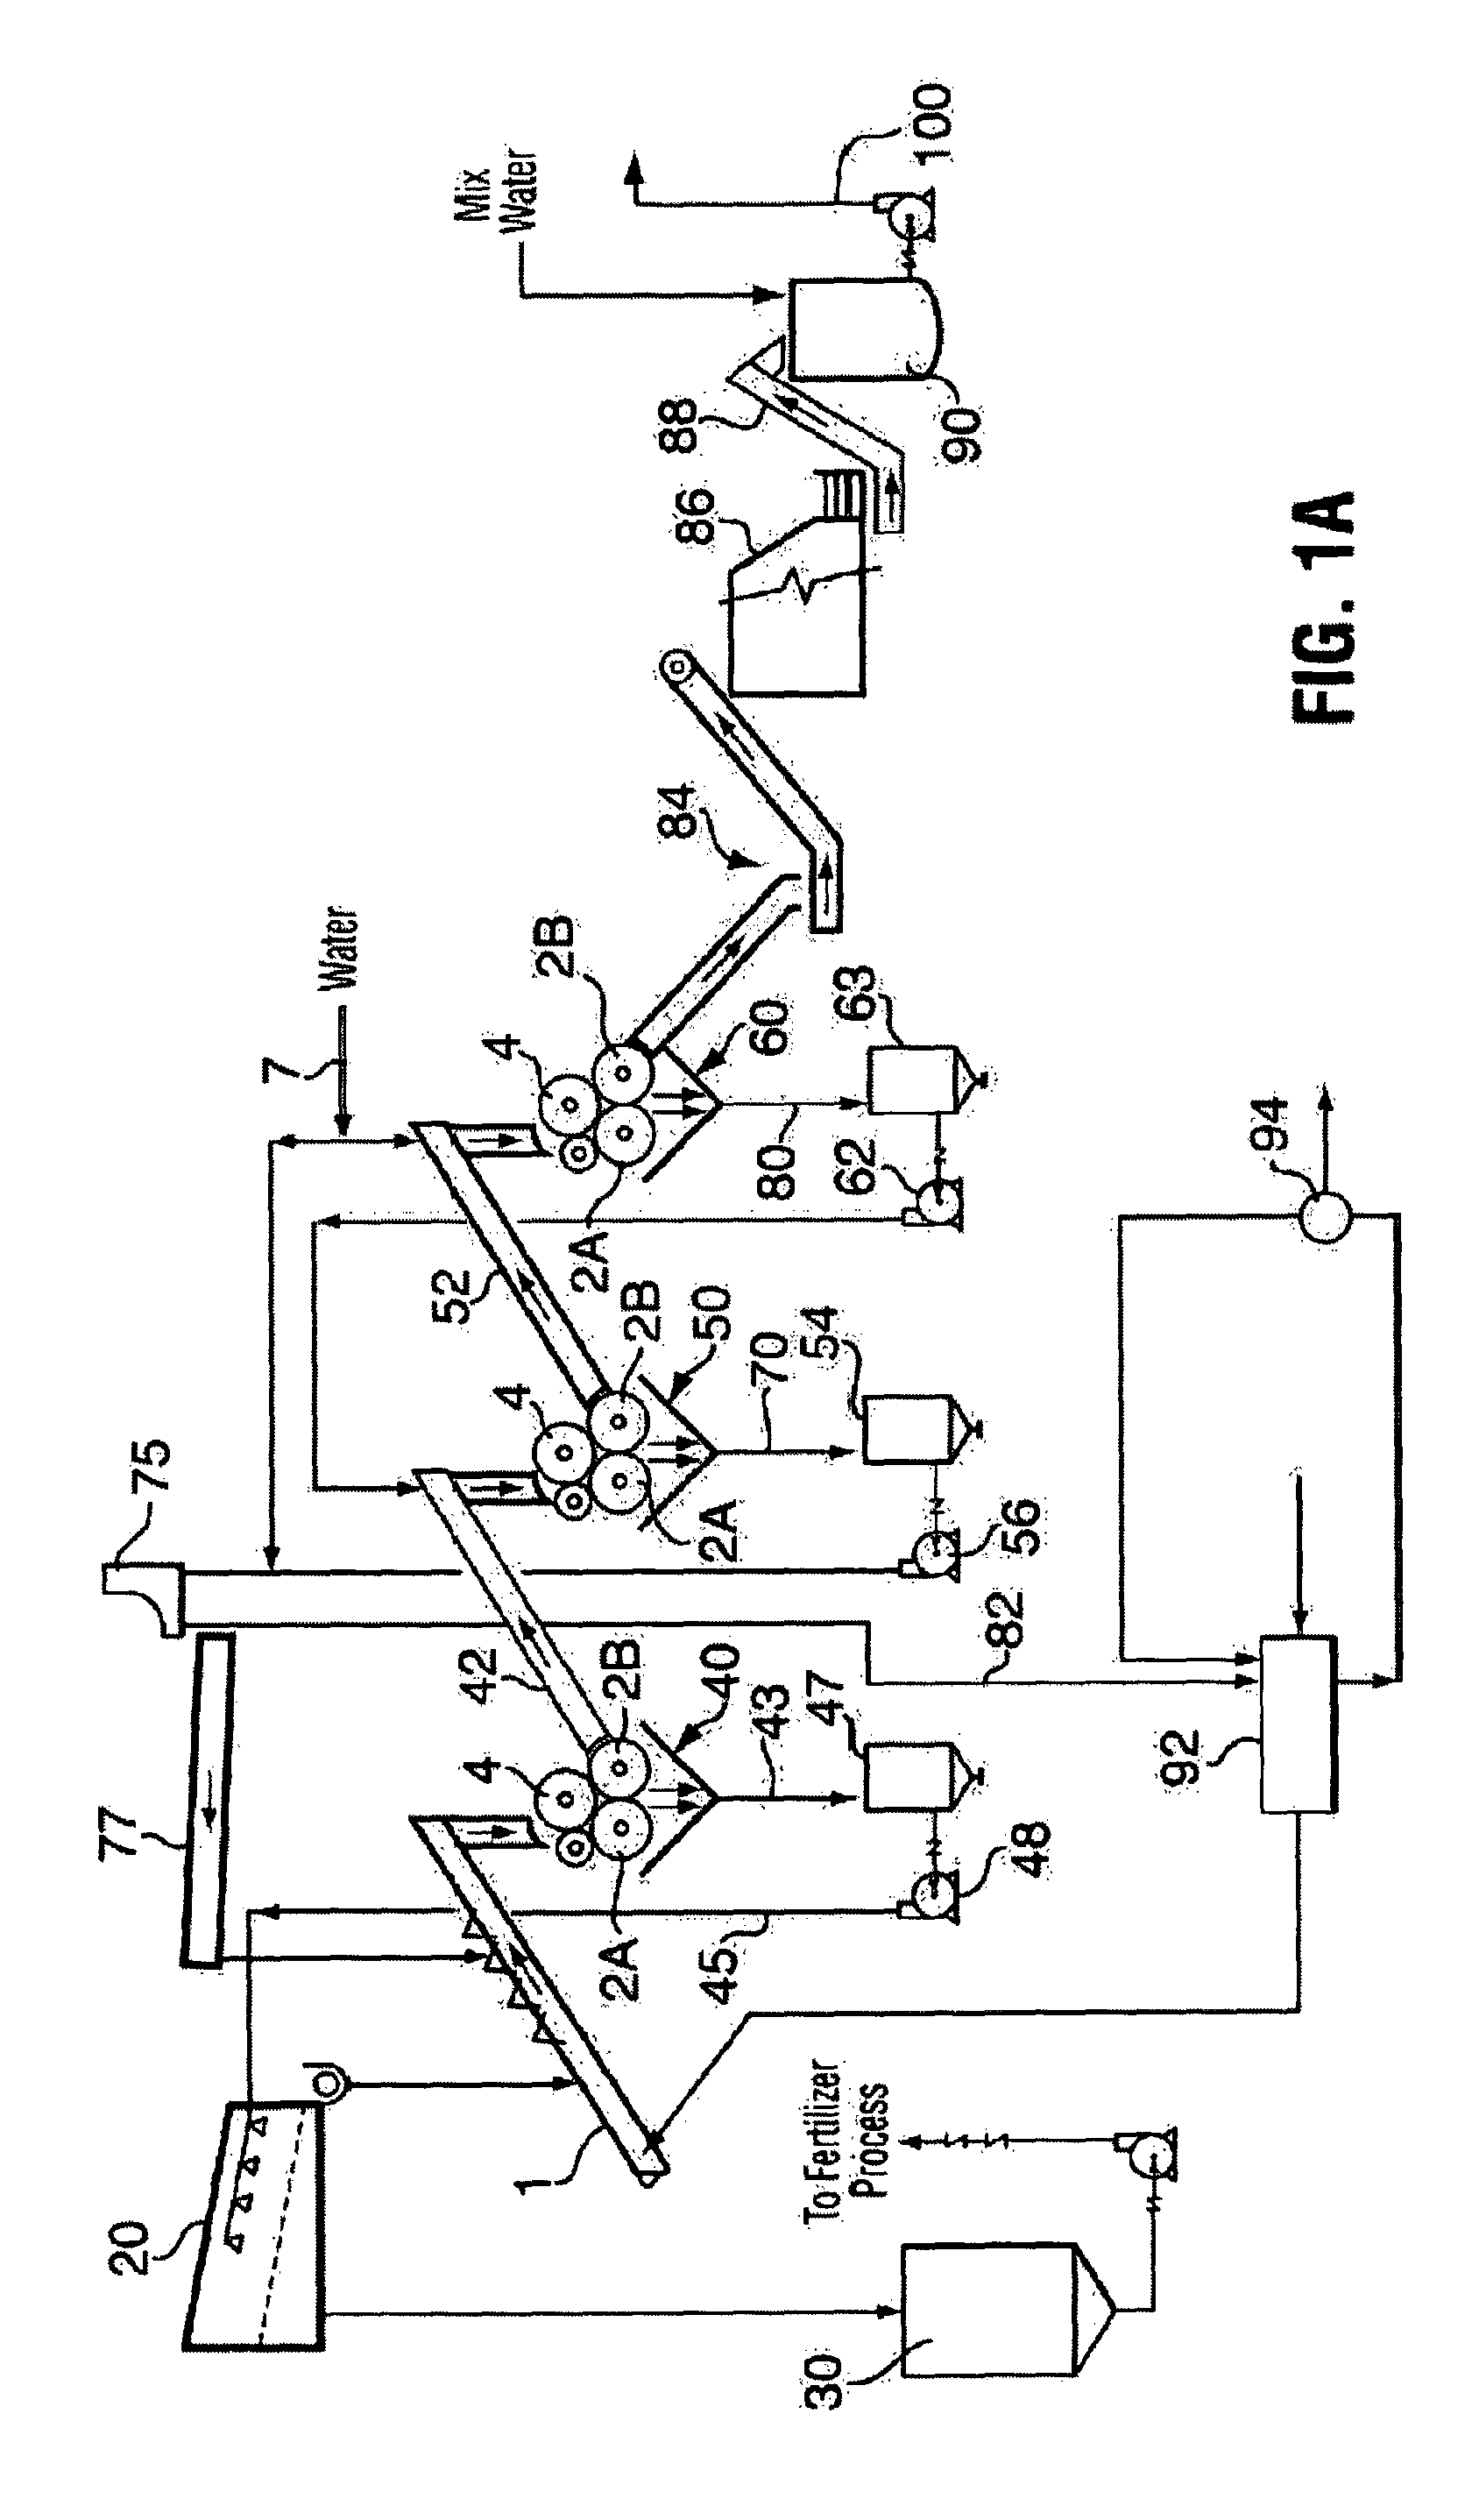 Process for producing a pretreated feedstock